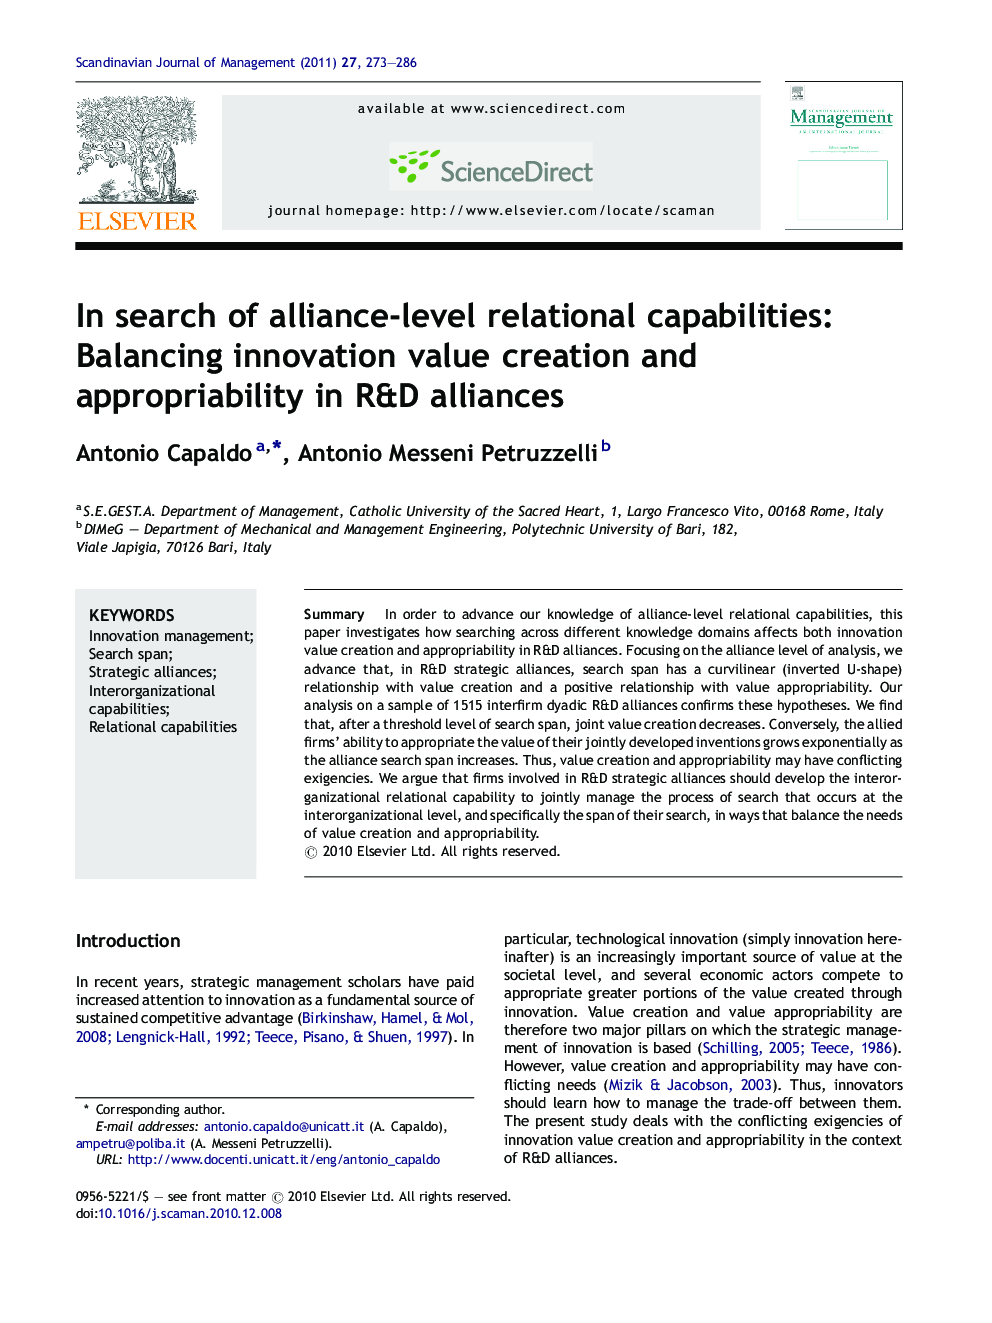 In search of alliance-level relational capabilities: Balancing innovation value creation and appropriability in R&D alliances